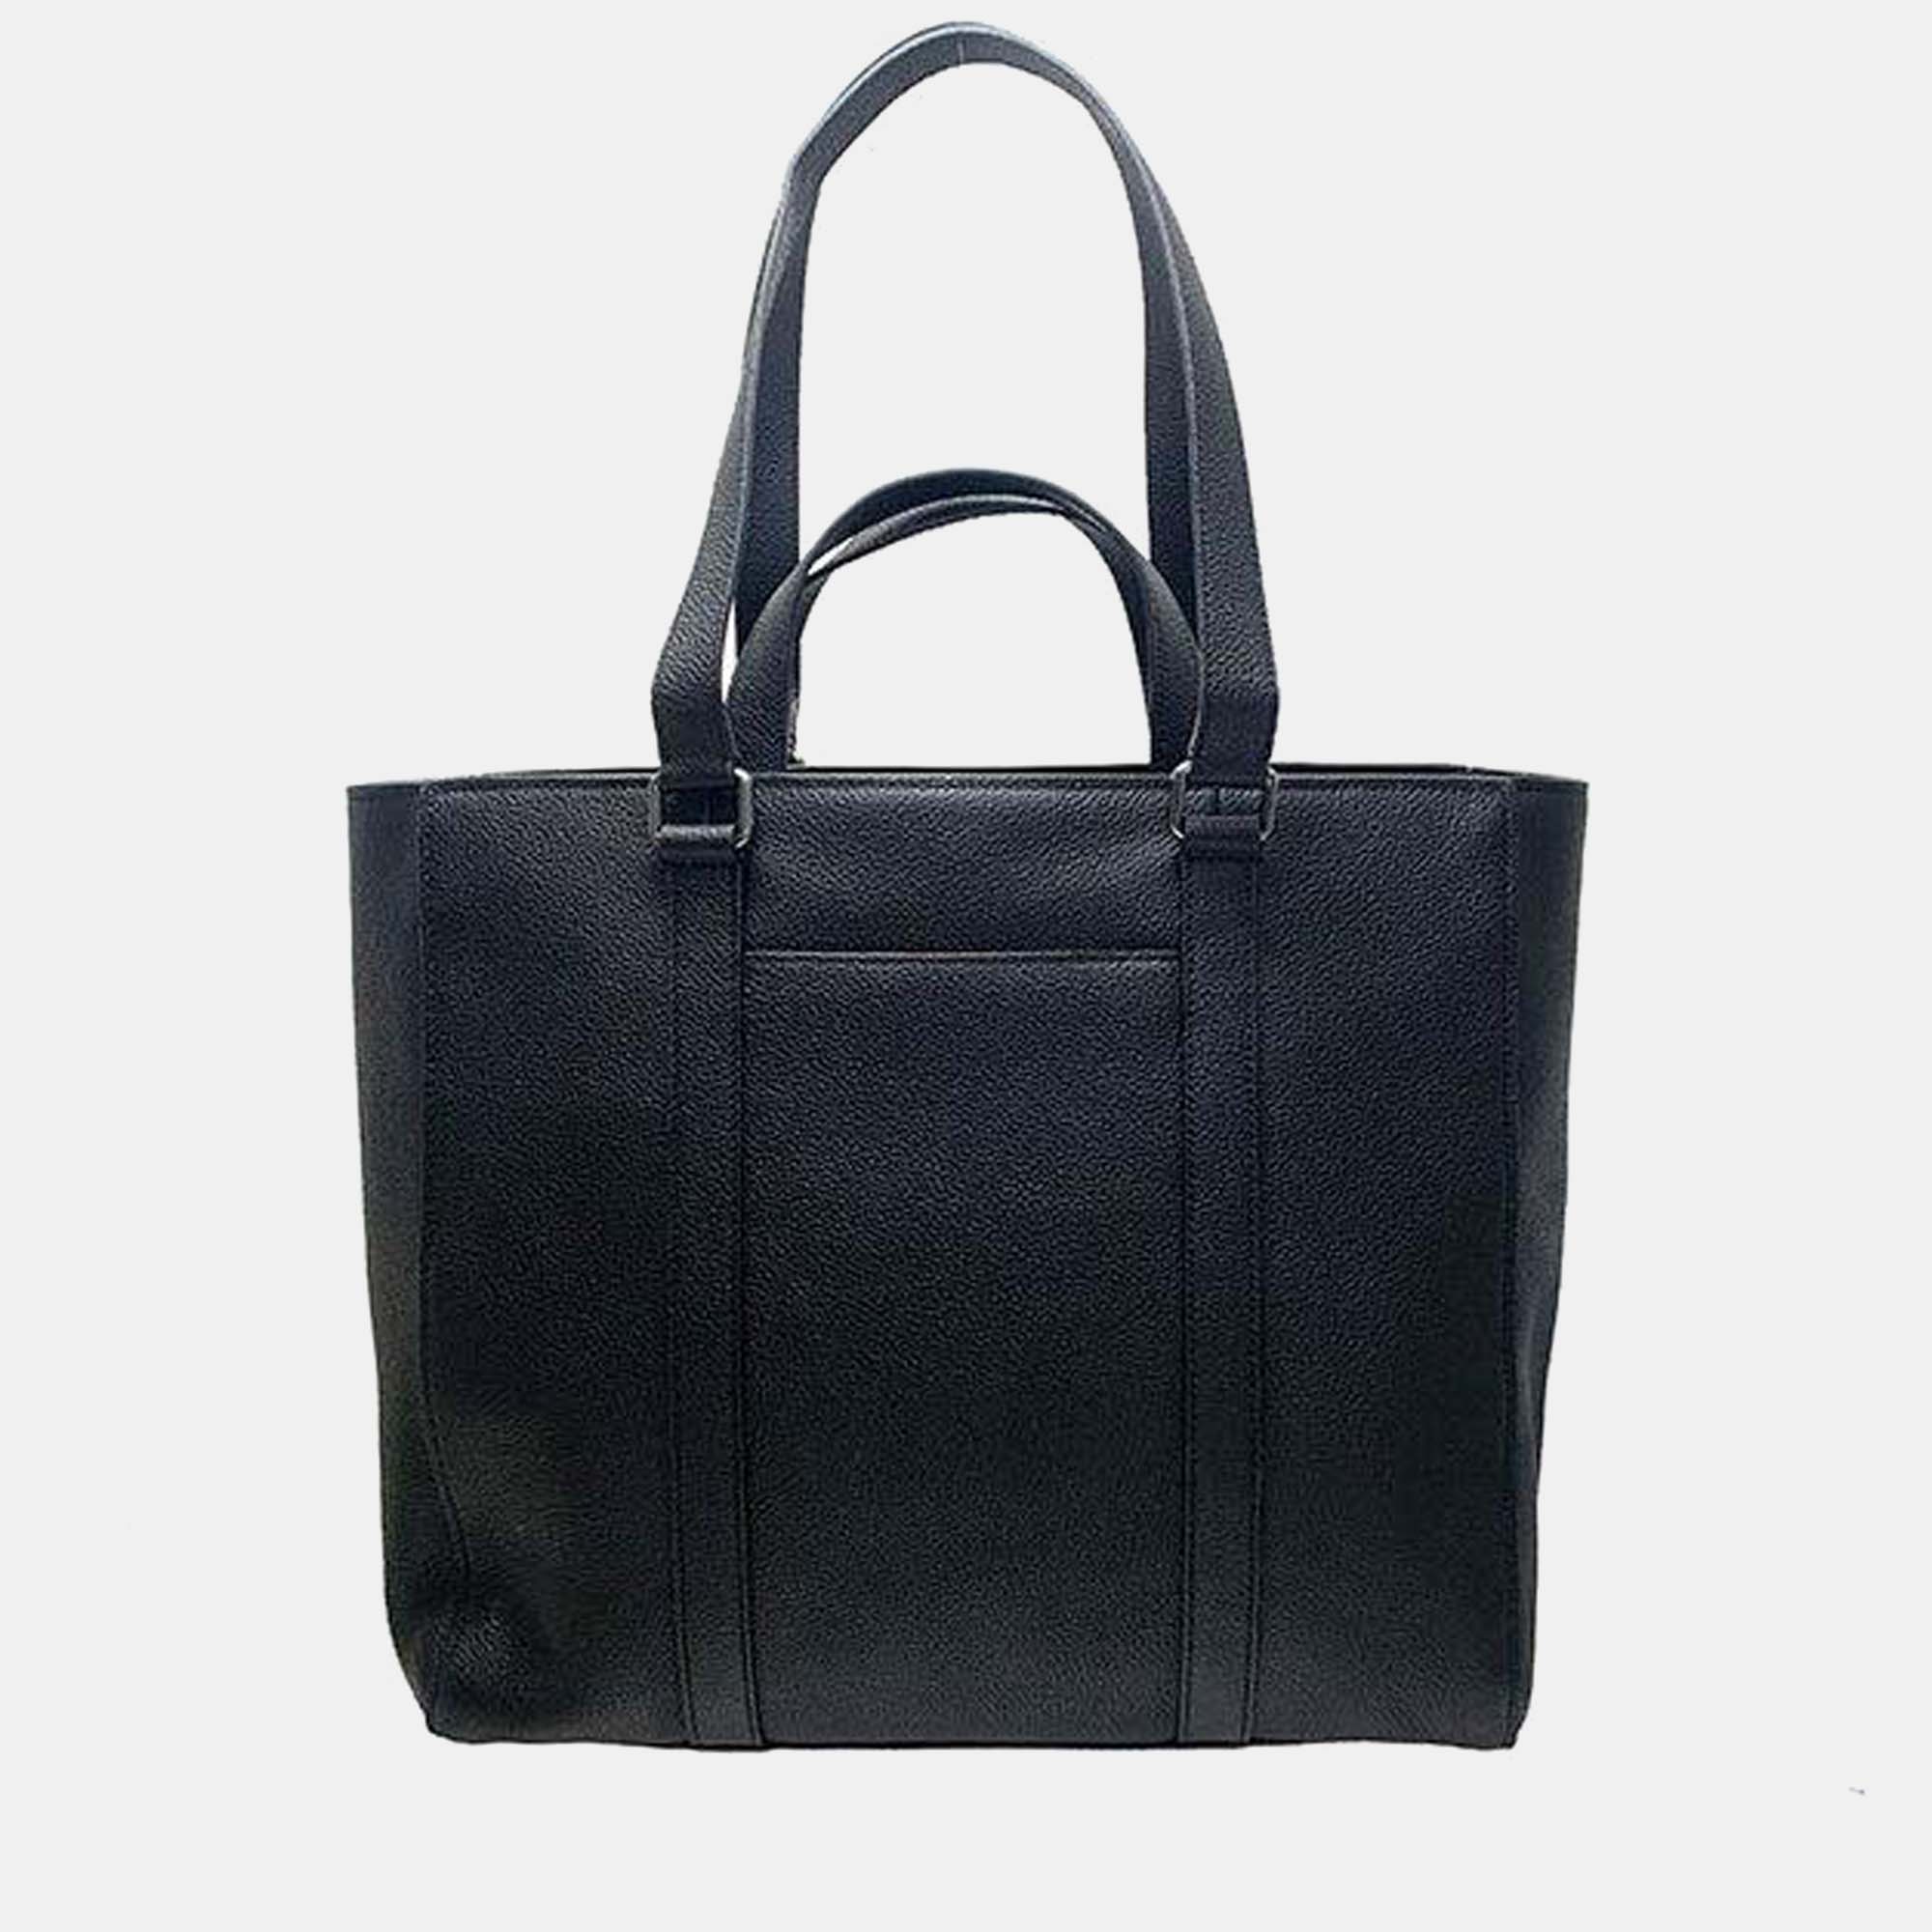 Ensure your days essentials are in order and your outfit is complete with this designer bag. Crafted using the best materials the bag carries the maisons signature of artful craftsmanship and enduring appeal.